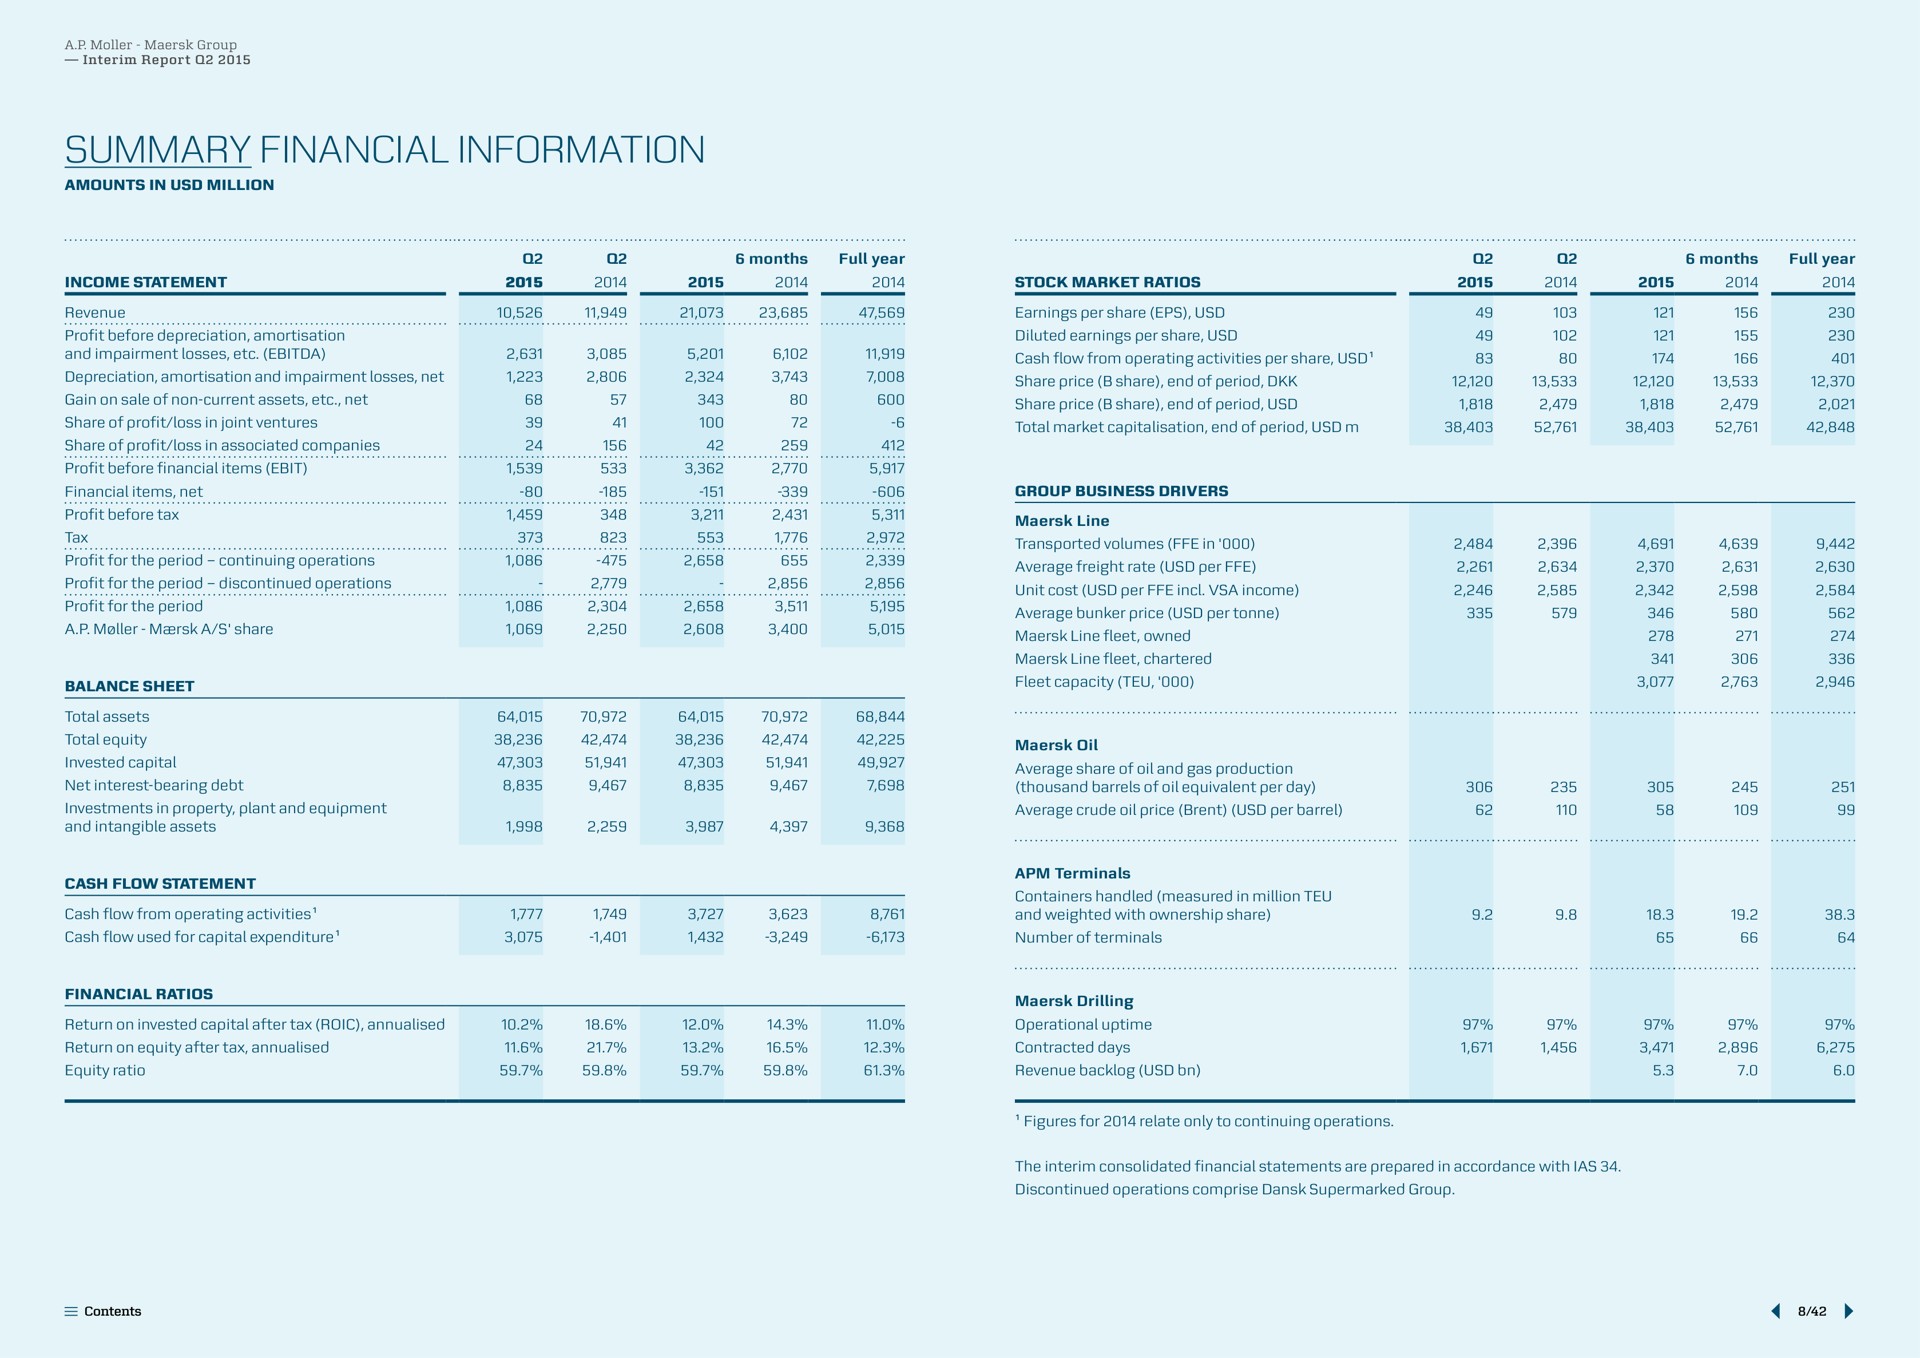 summary financial information share of profit associated companies at a the period discontinued operations i ice nana | Maersk